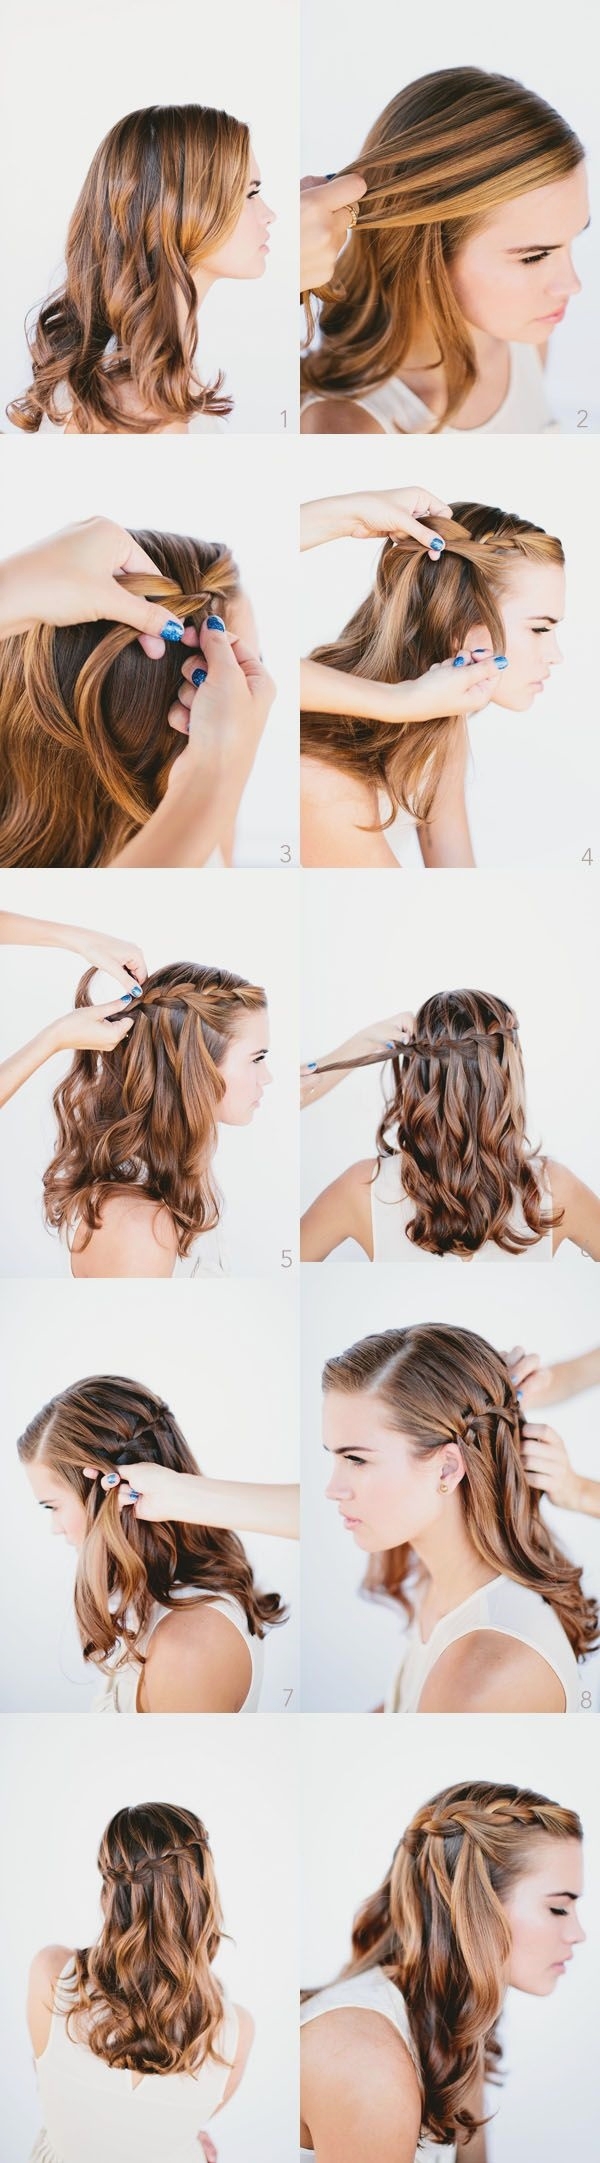 Easy Step By Step Hairstyles for Long Hair6